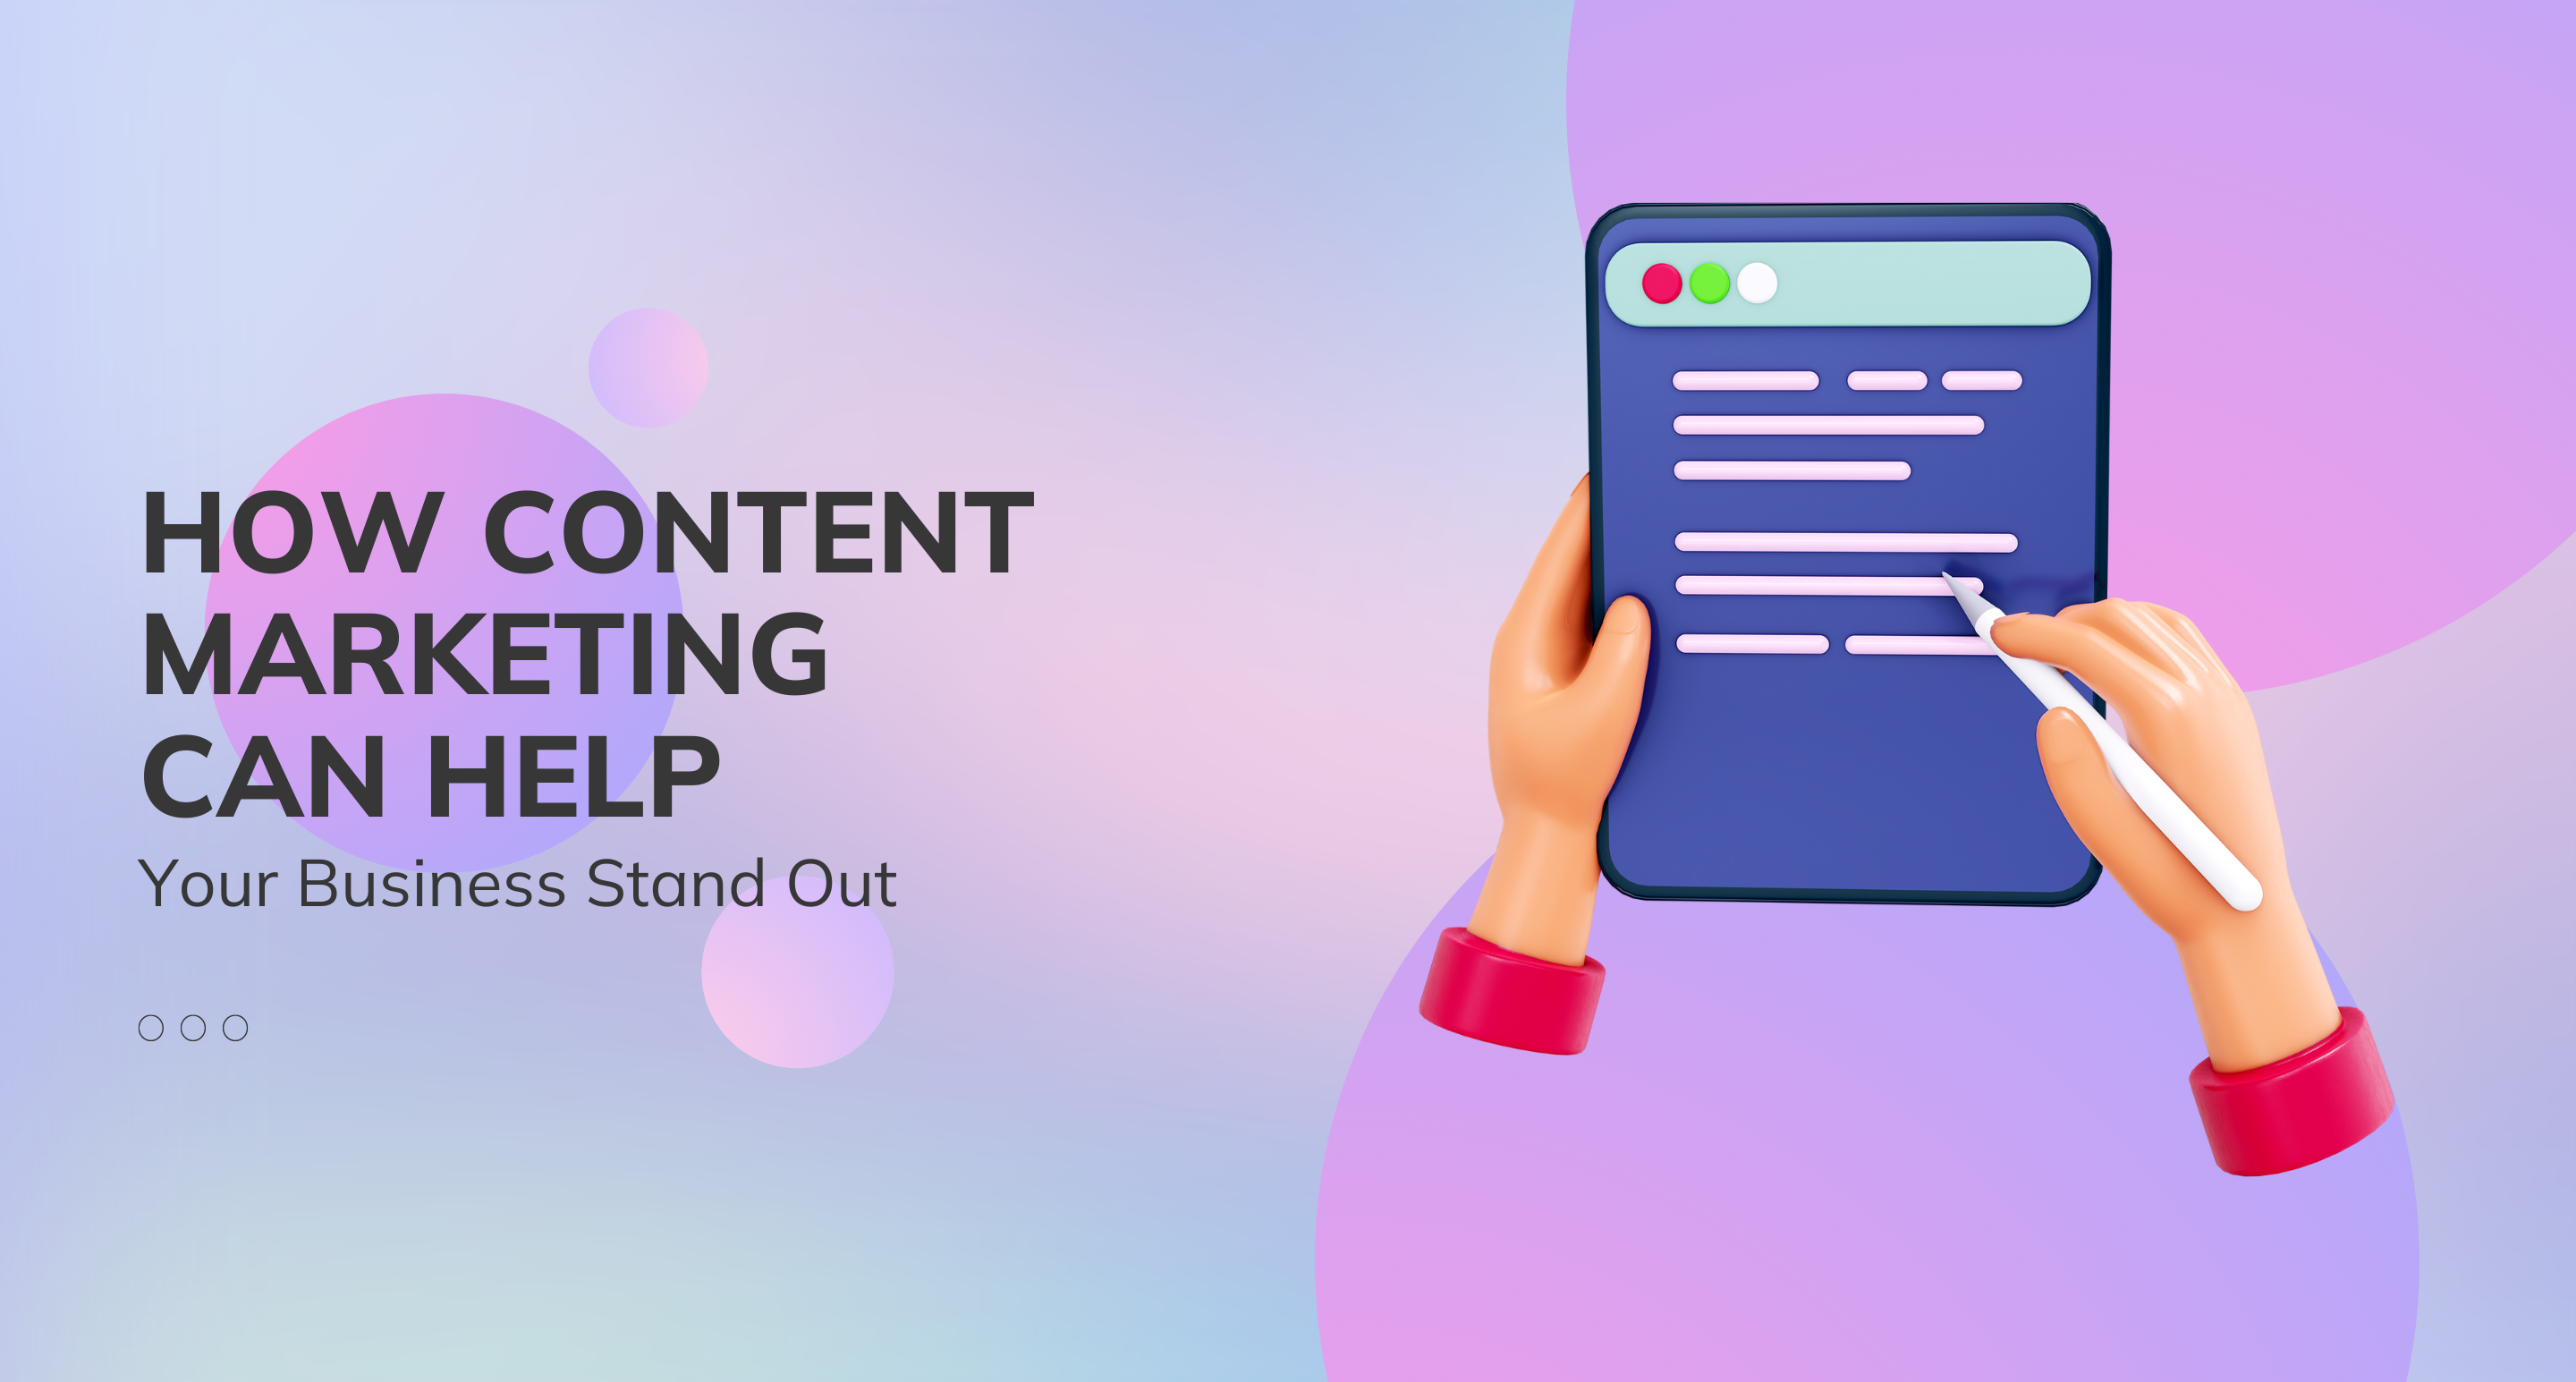 How Content Marketing Can Help Your Business Stand Out